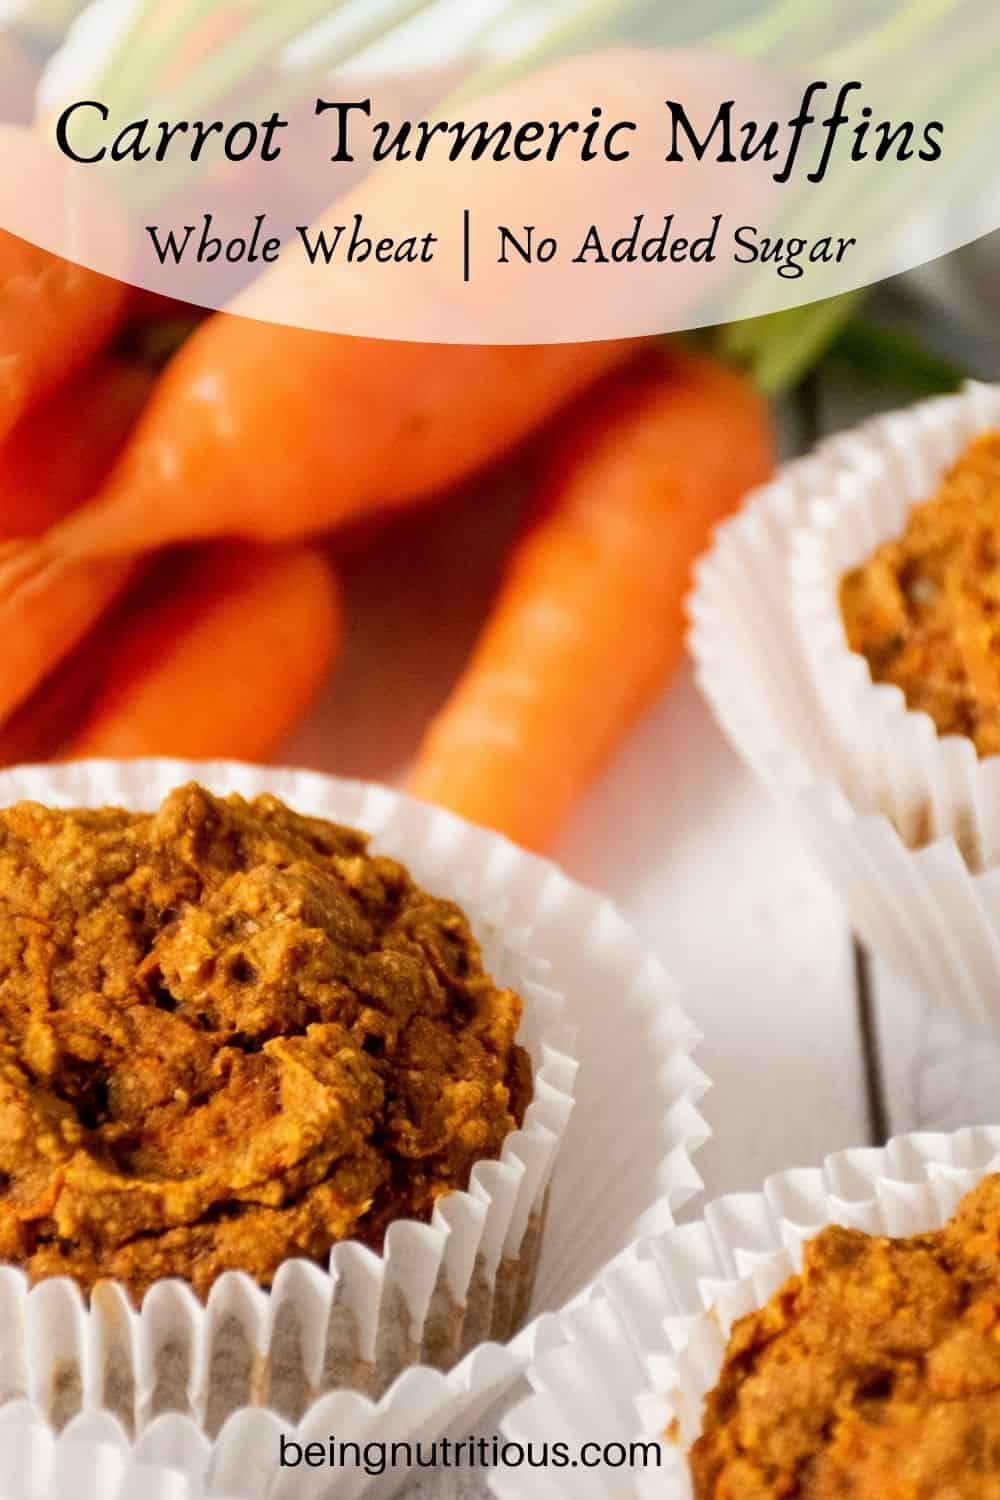 Muffins on a table with fresh carrots in the background. Text overlay: Carrot Turmeric Muffins; whole wheat, no added sugar.